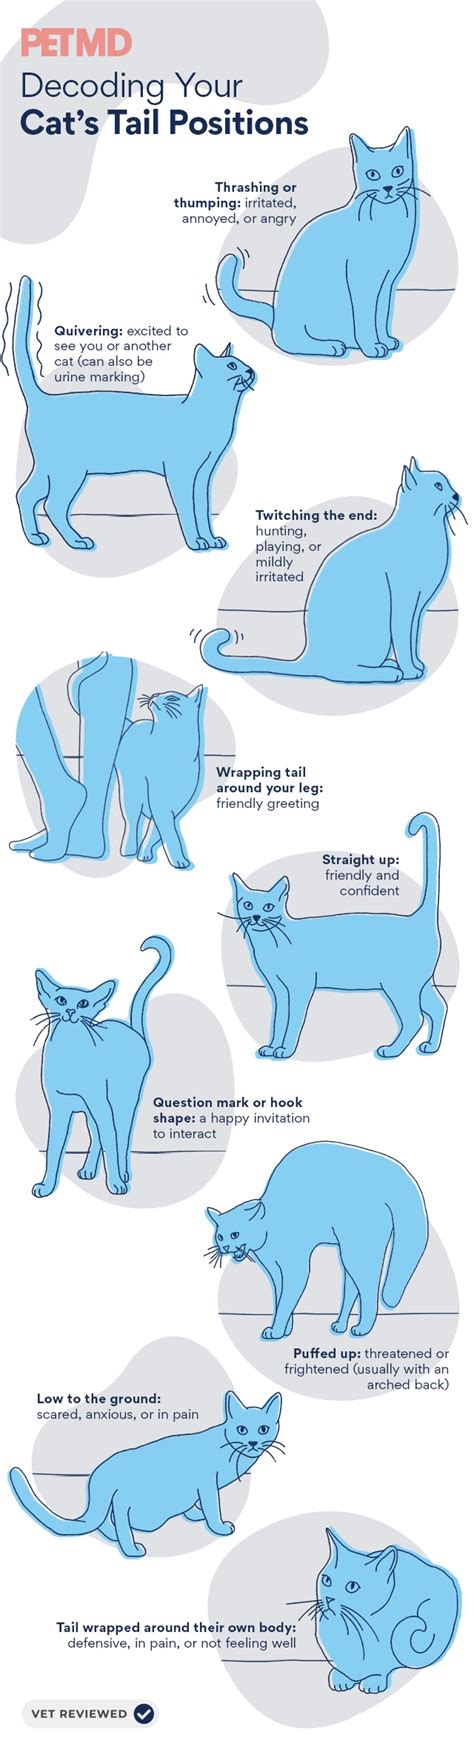 Cat Tail Language 101 Why Cats Wag Their Tails And More Petmd